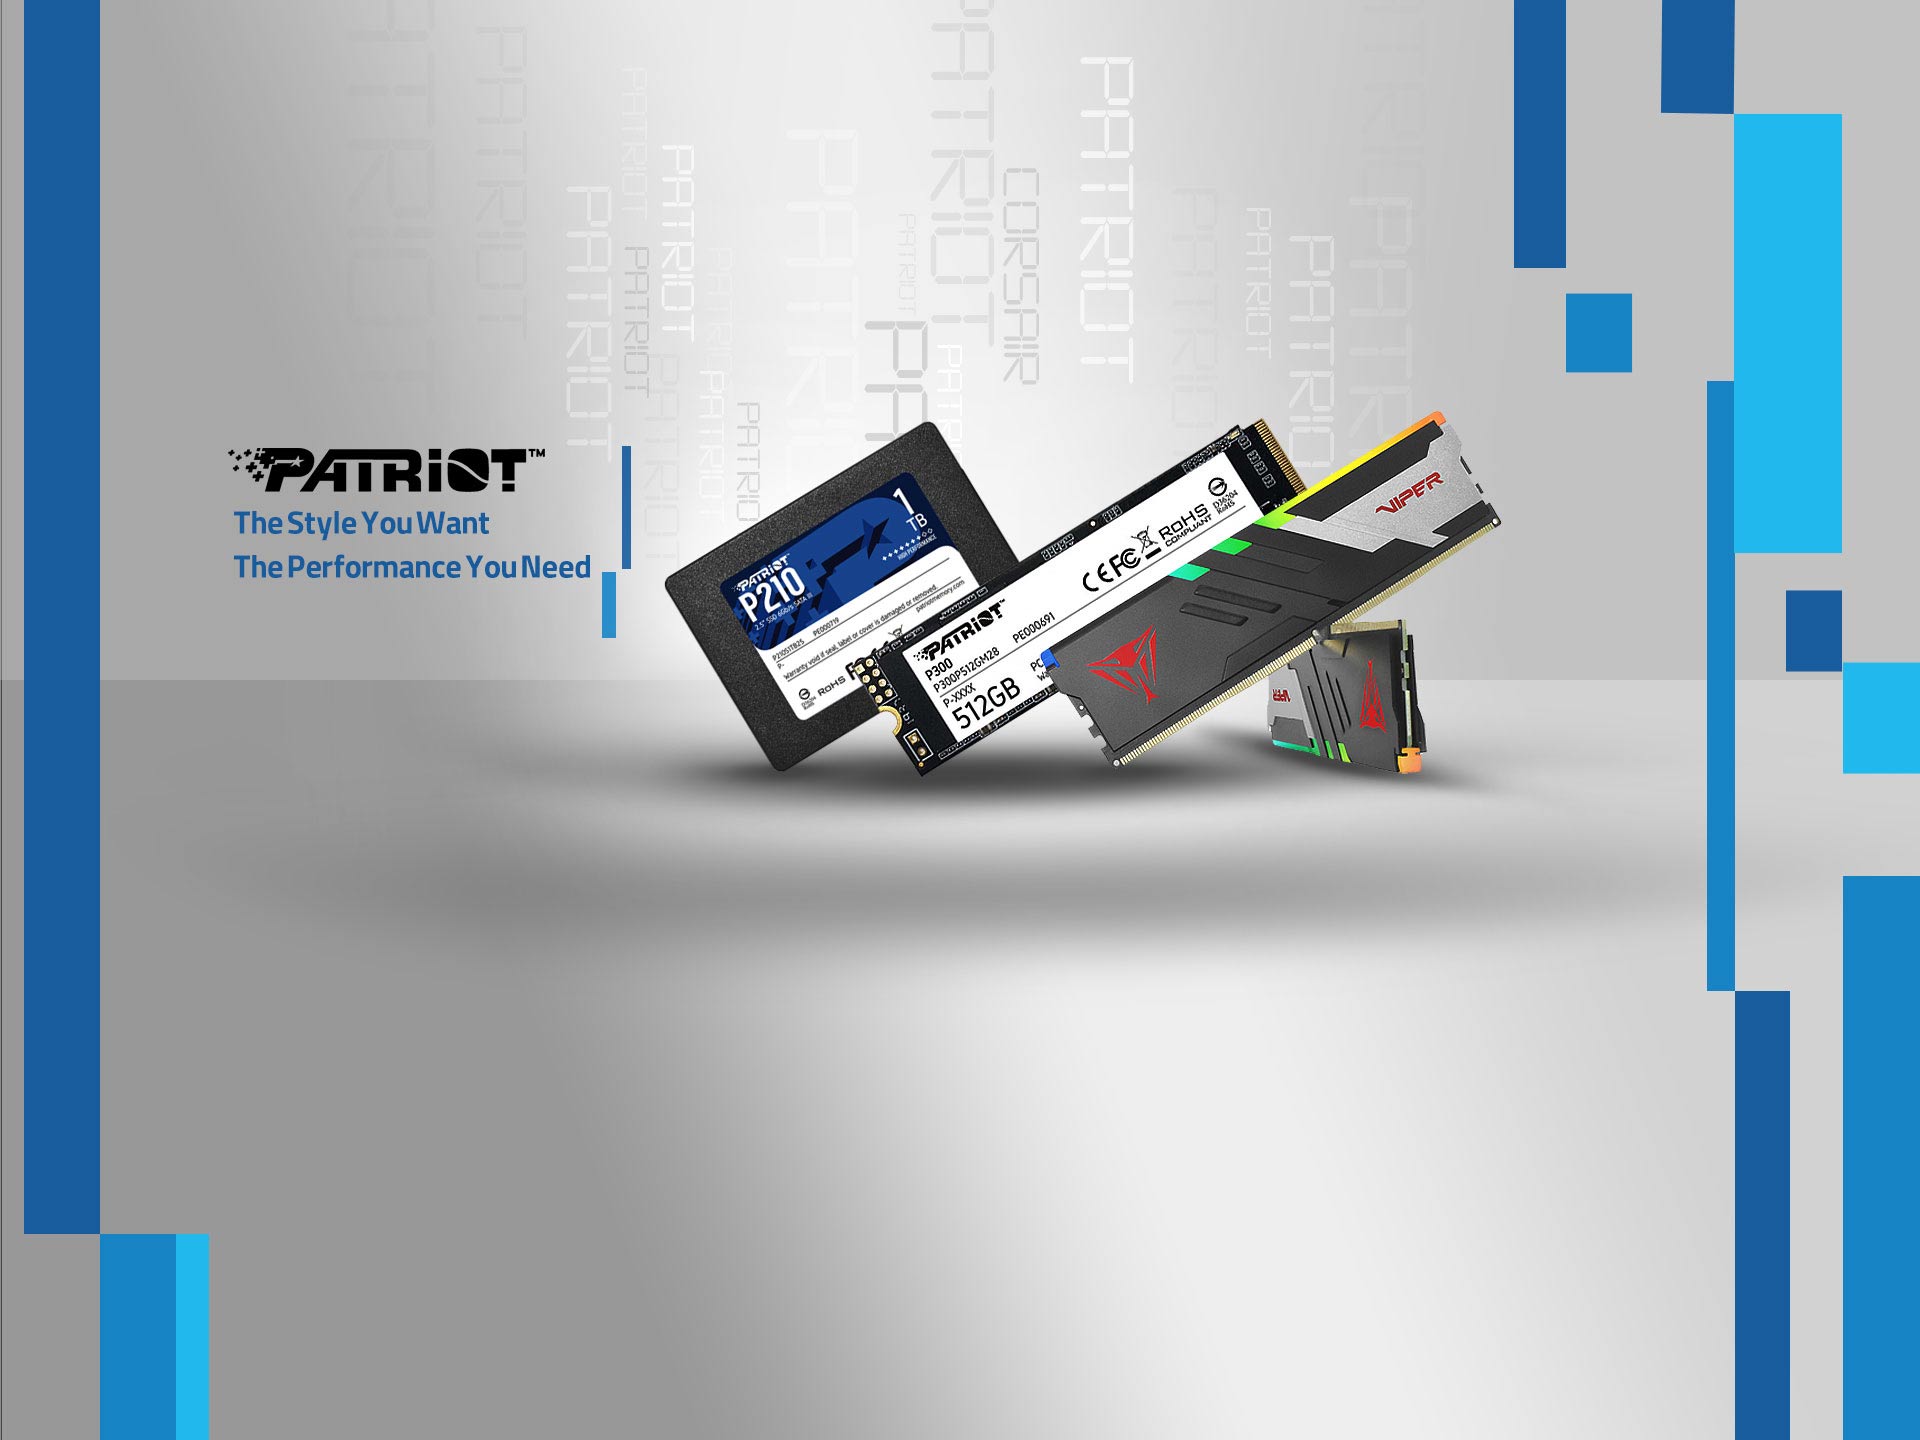 Patriot SSD and Memory